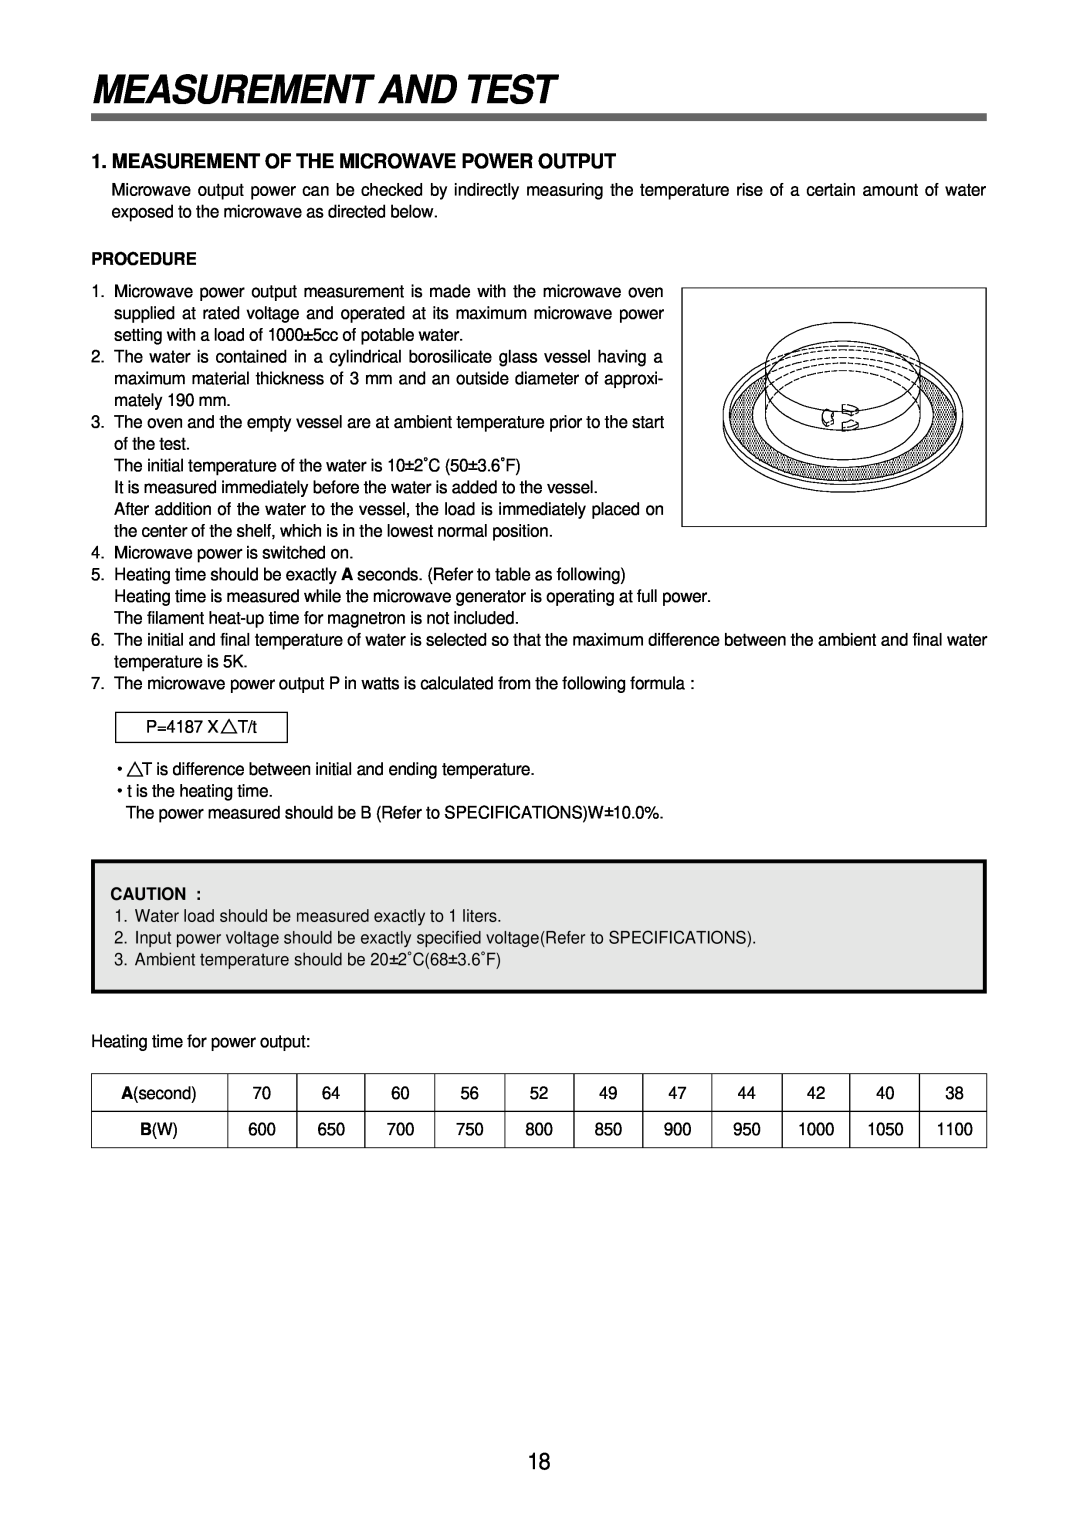 Daewoo KOR-6N575S, Microwave Oven service manual Measurement And Test, Measurement Of The Microwave Power Output, Procedure 